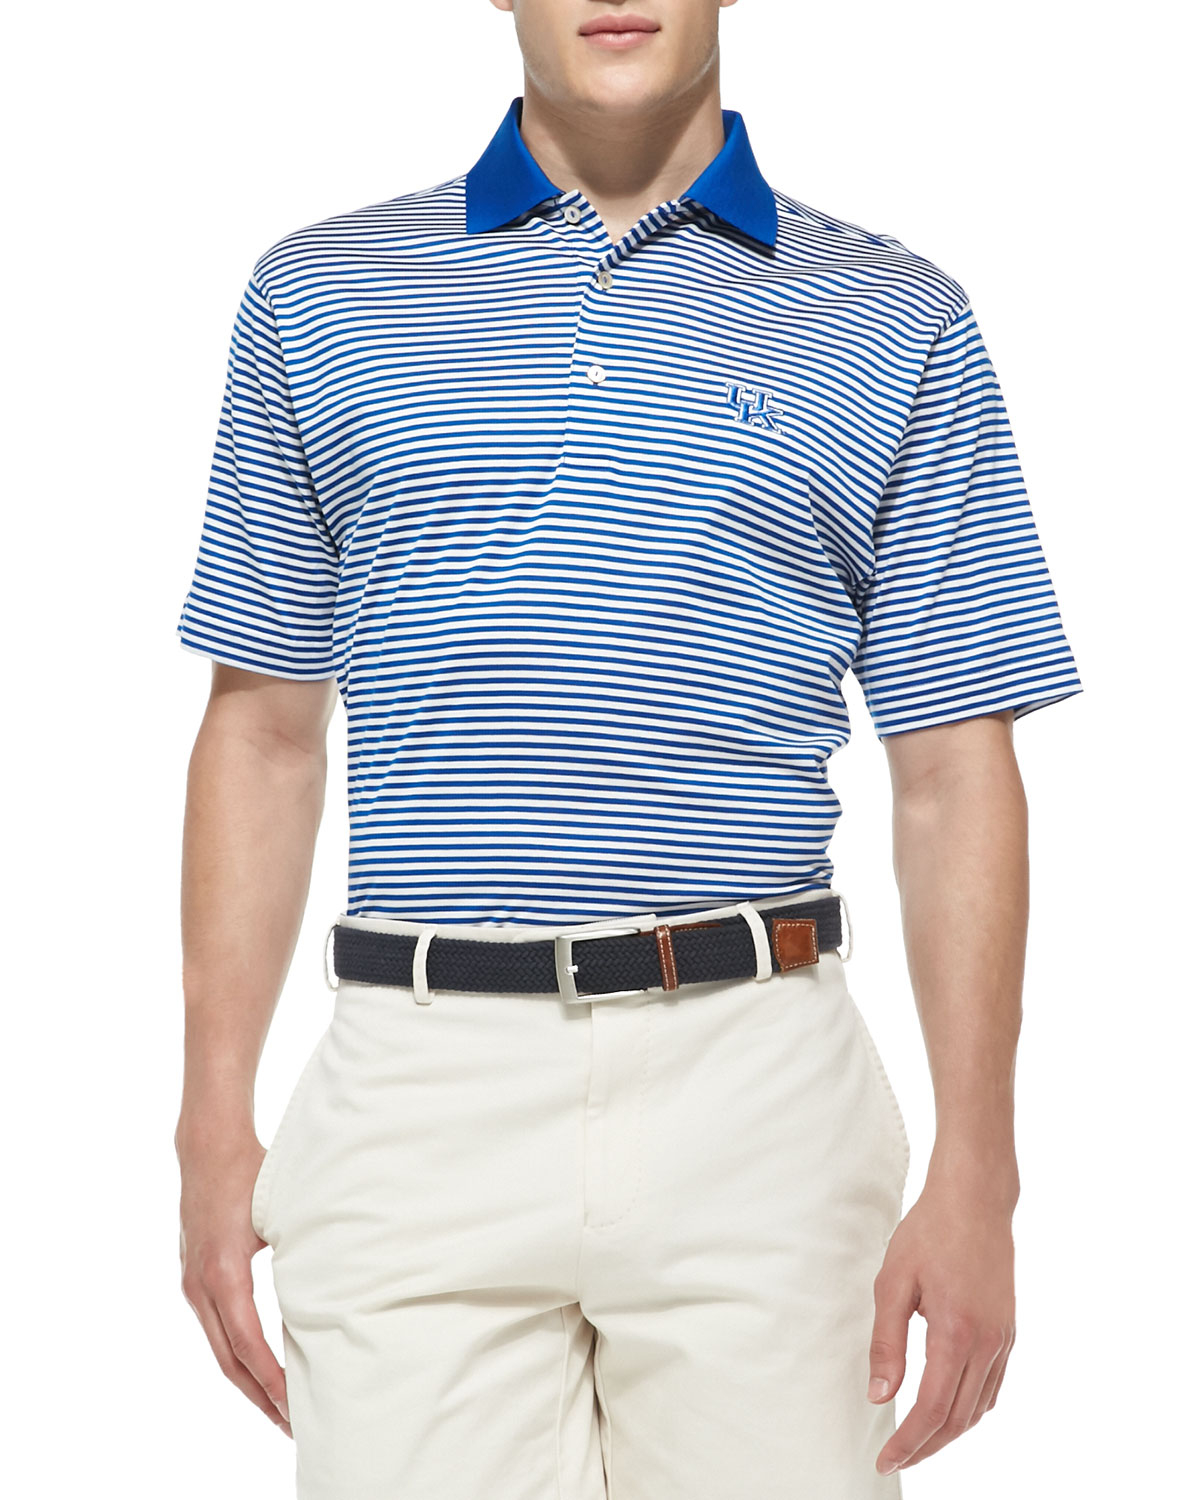 Lyst - Peter Millar University Of Kentucky Striped Gameday College Polo ...